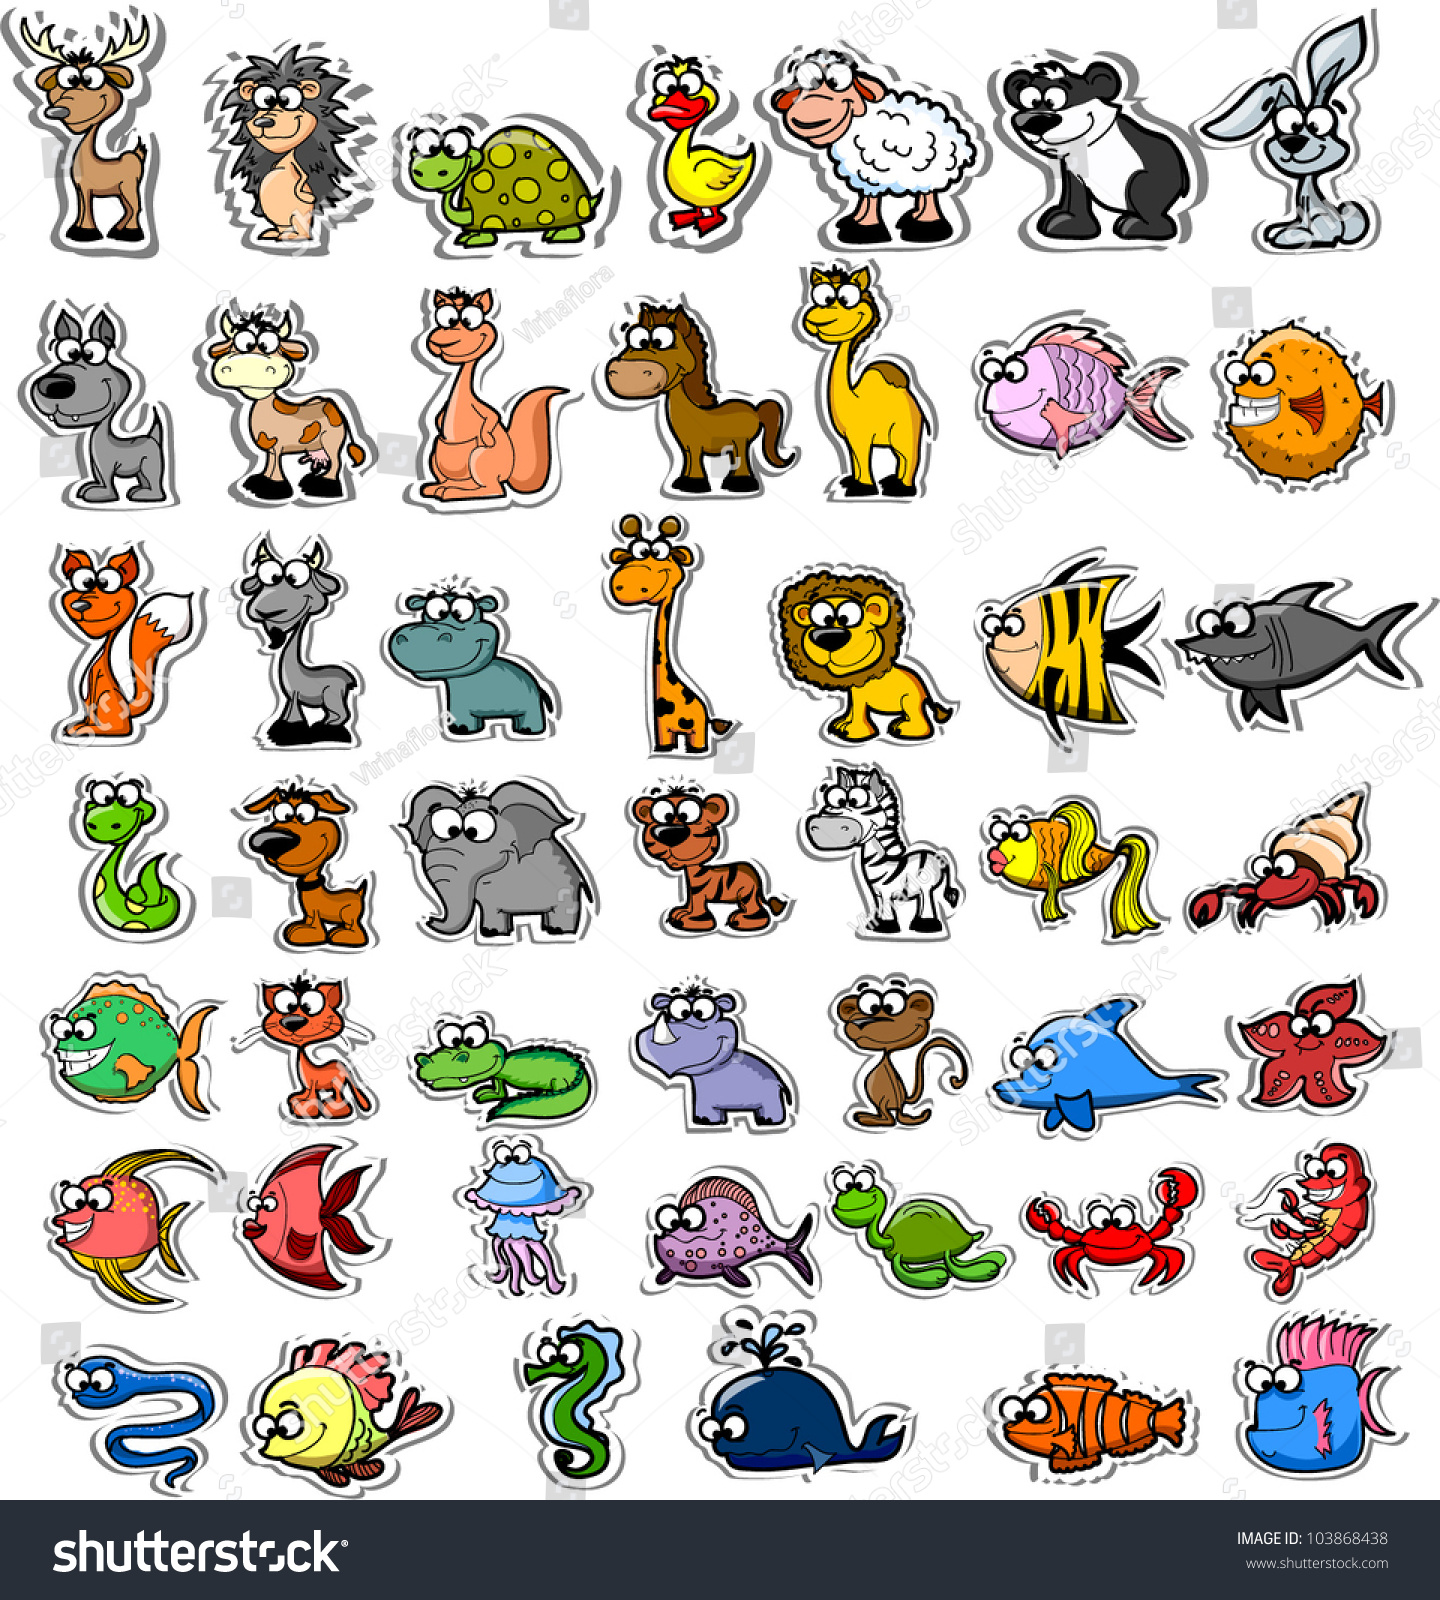 clipart of different animals - photo #16